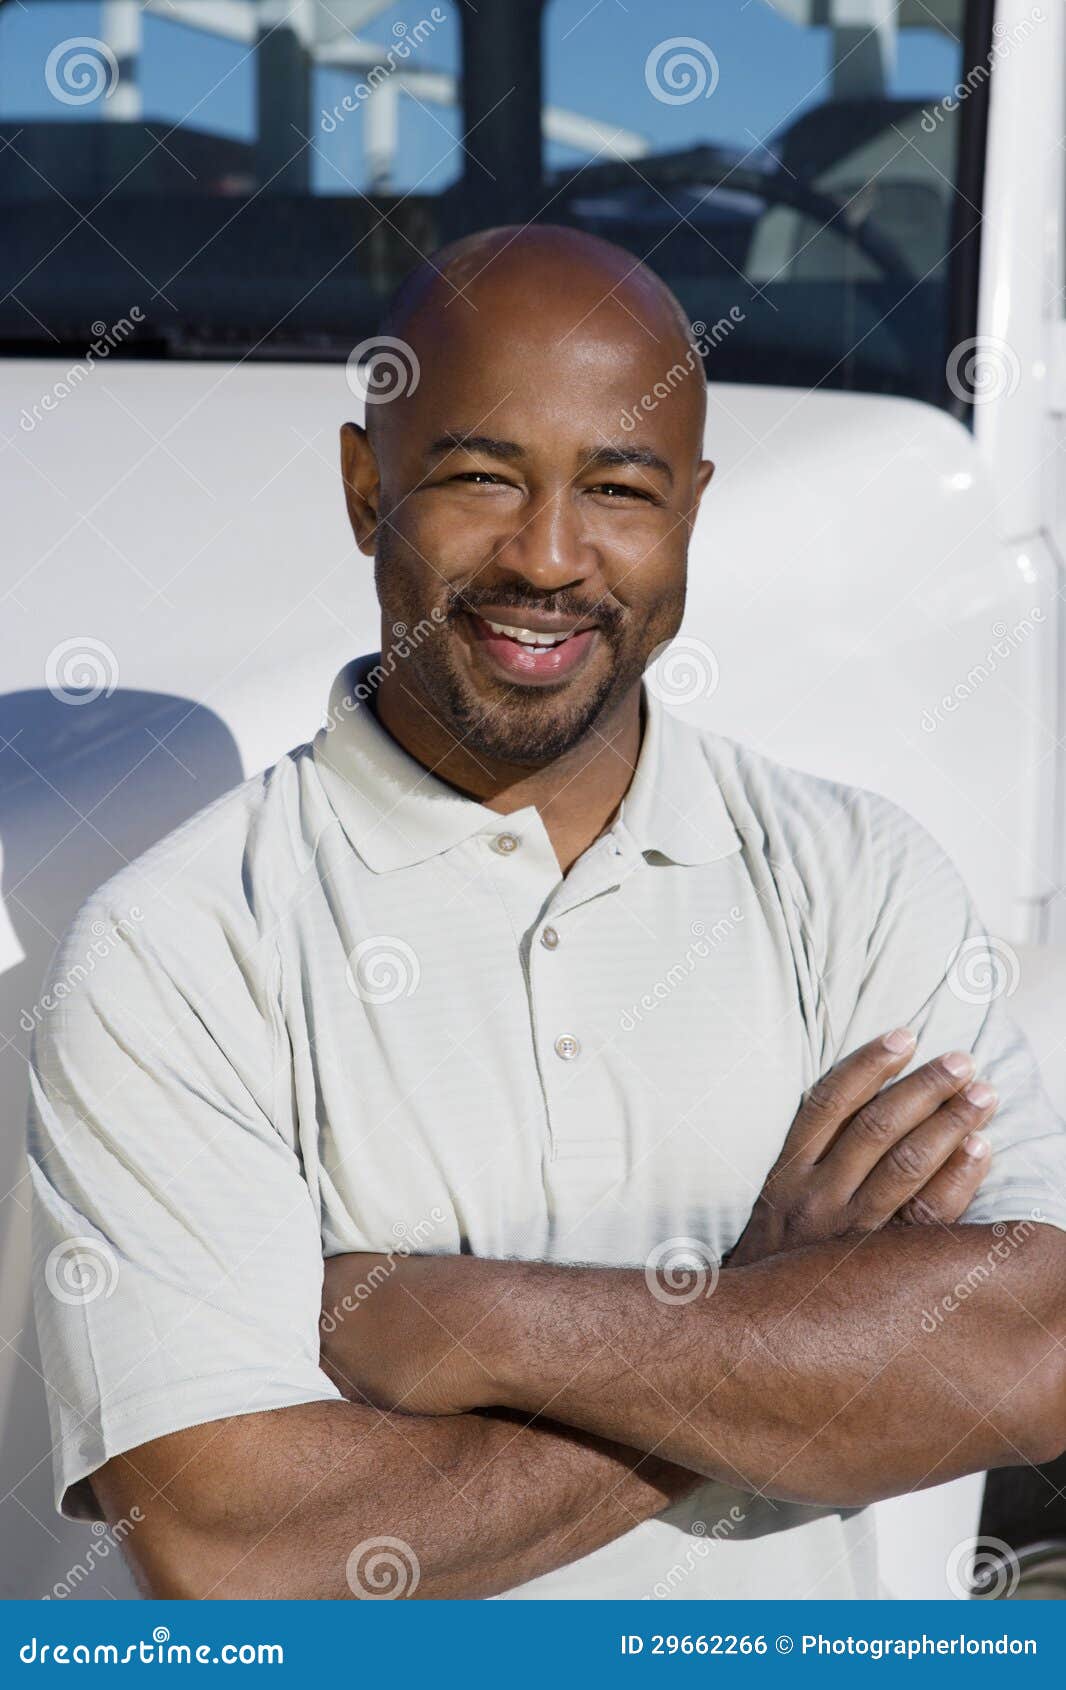 driver in front of a truck